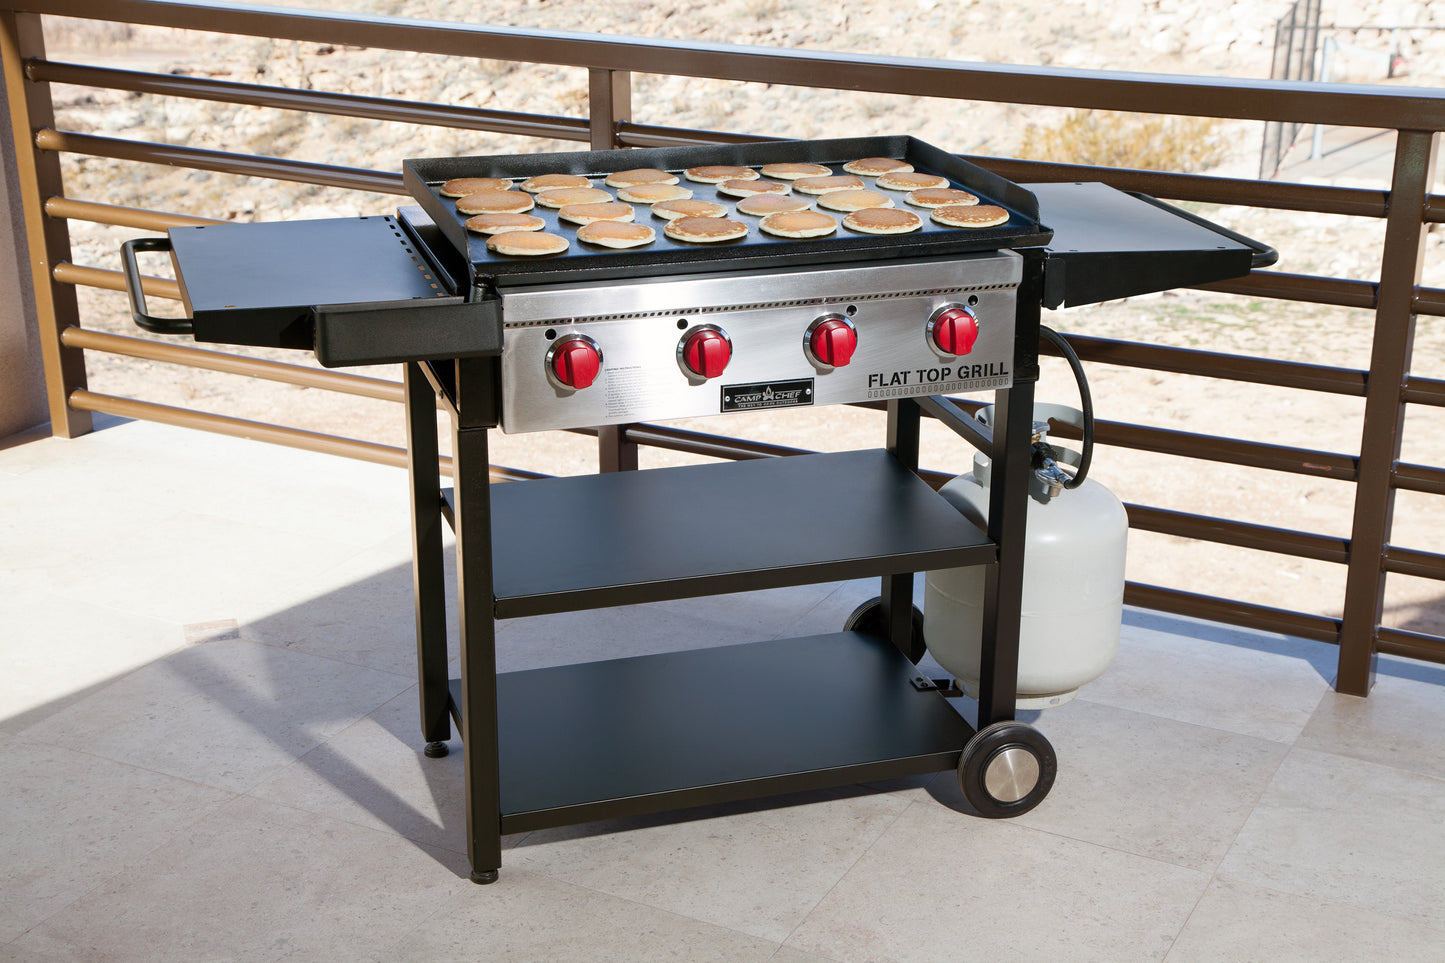 Camp Chef Flat Top Grill 600 (FTG600), Best Professional Restaurant Grade 2-in-1 Cooking Grill and Griddle with Side Shelves